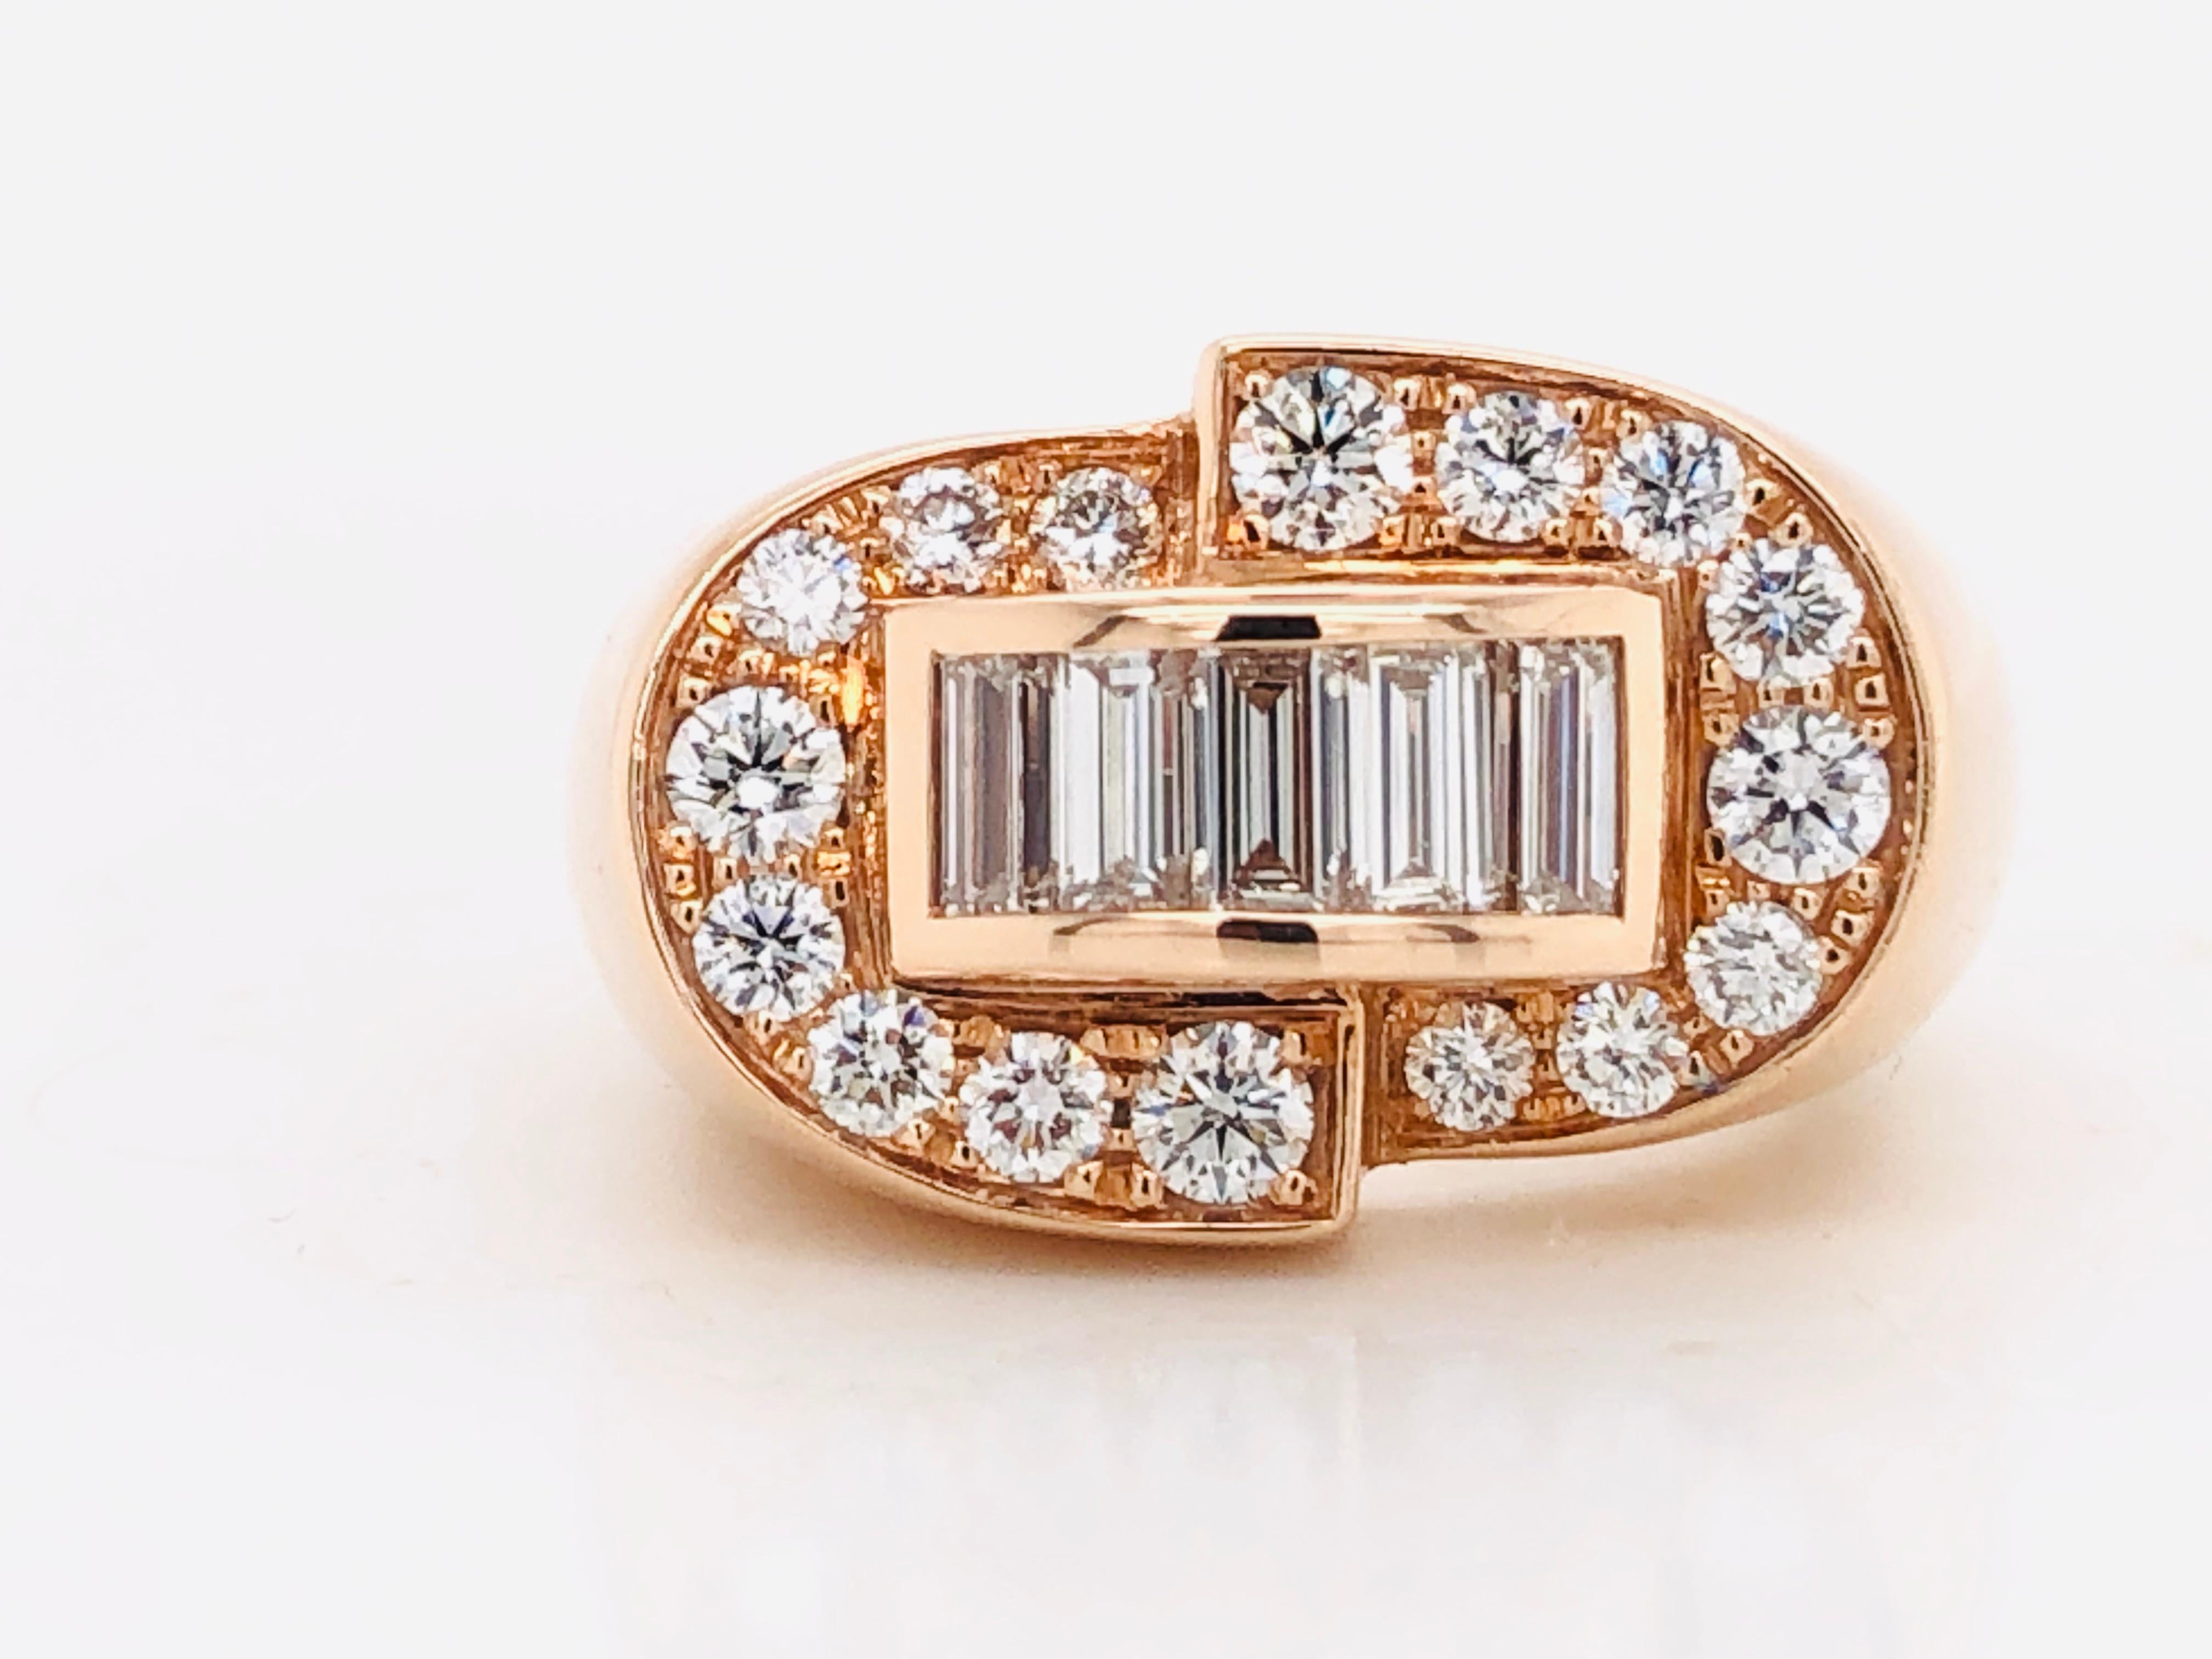 White Diamonds Baguette Cut and Brillant Cut on Rose Gold 18 k Fashion Ring 
White Diamonds Baguettes Cut and Brillant Cut 1.57 ct and 1.55 ct 
Art deco shape.
French Size : 52.5
US Sise : 6
British Size : M
Weight of gold : 13.65 grams 